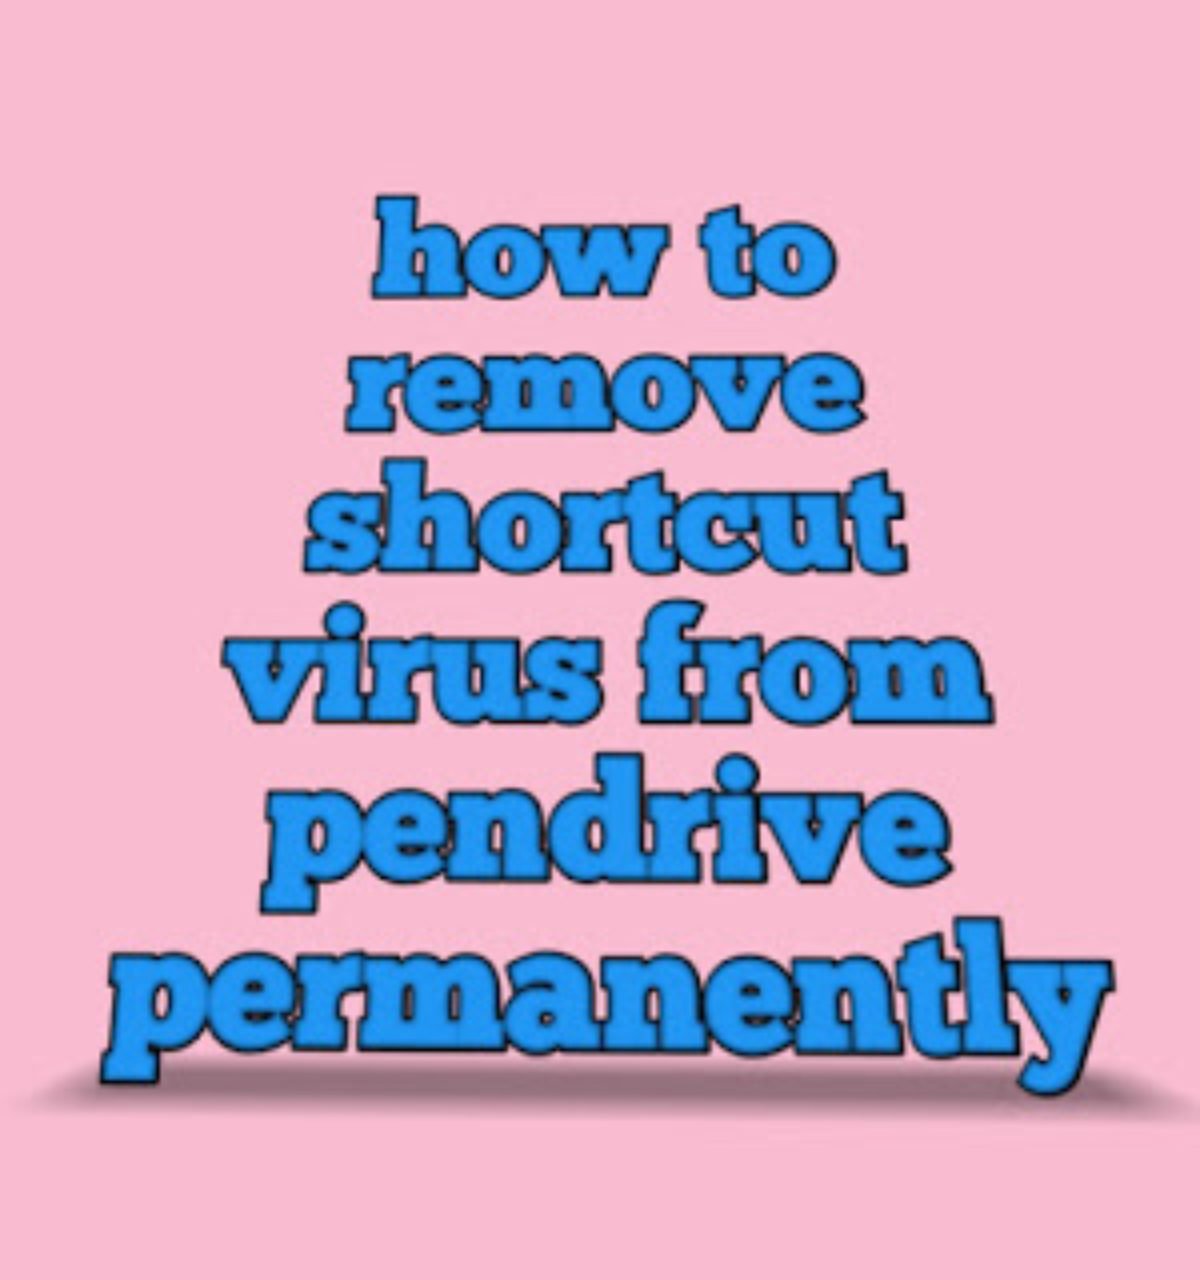 how to remove the virus in pendrive